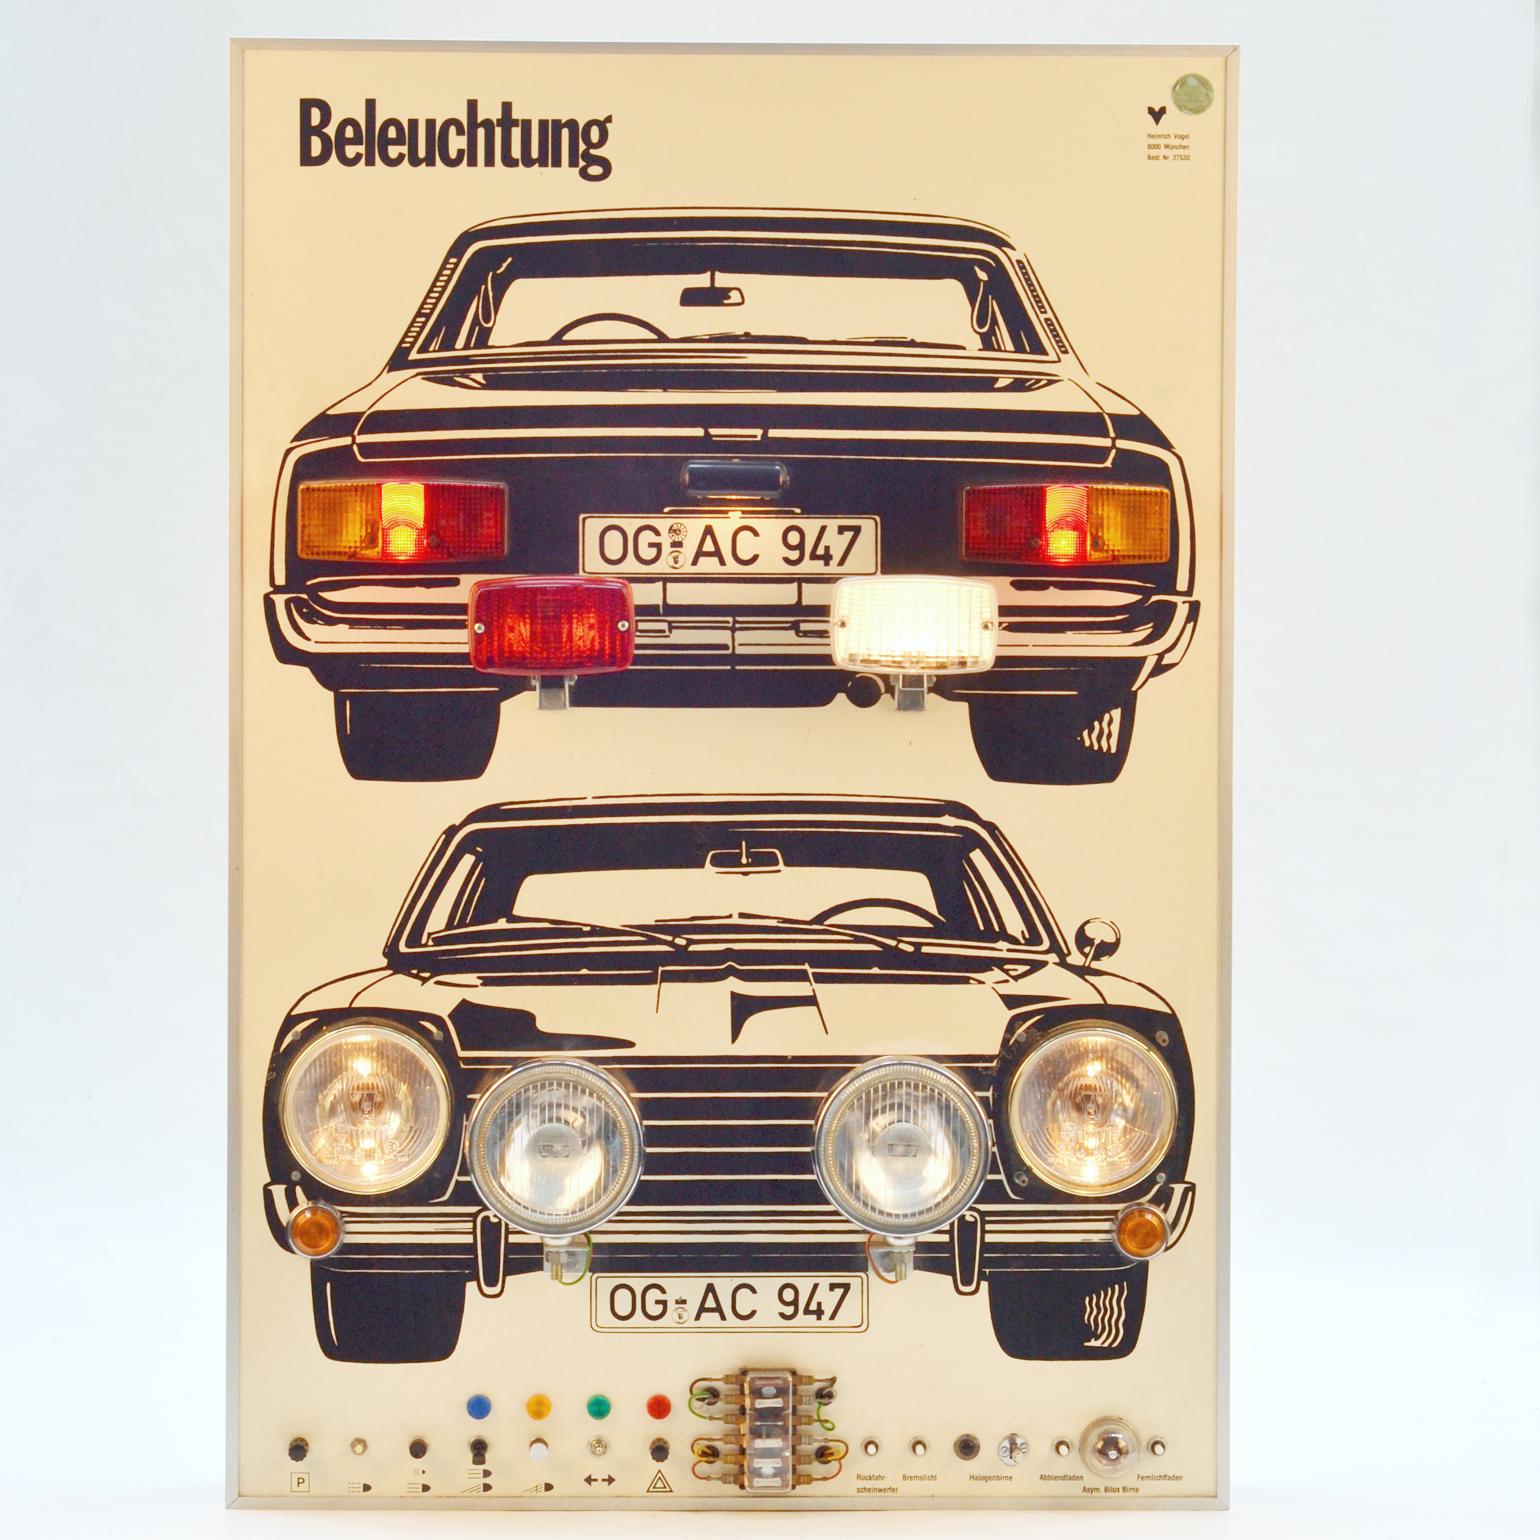 The wall mounted 1970's artwork of car, demonstrating driving instructions for the use of car lights. The manual instruction panel at the bottom can be used to switch on the various car lights and learn about the function of the operation of the